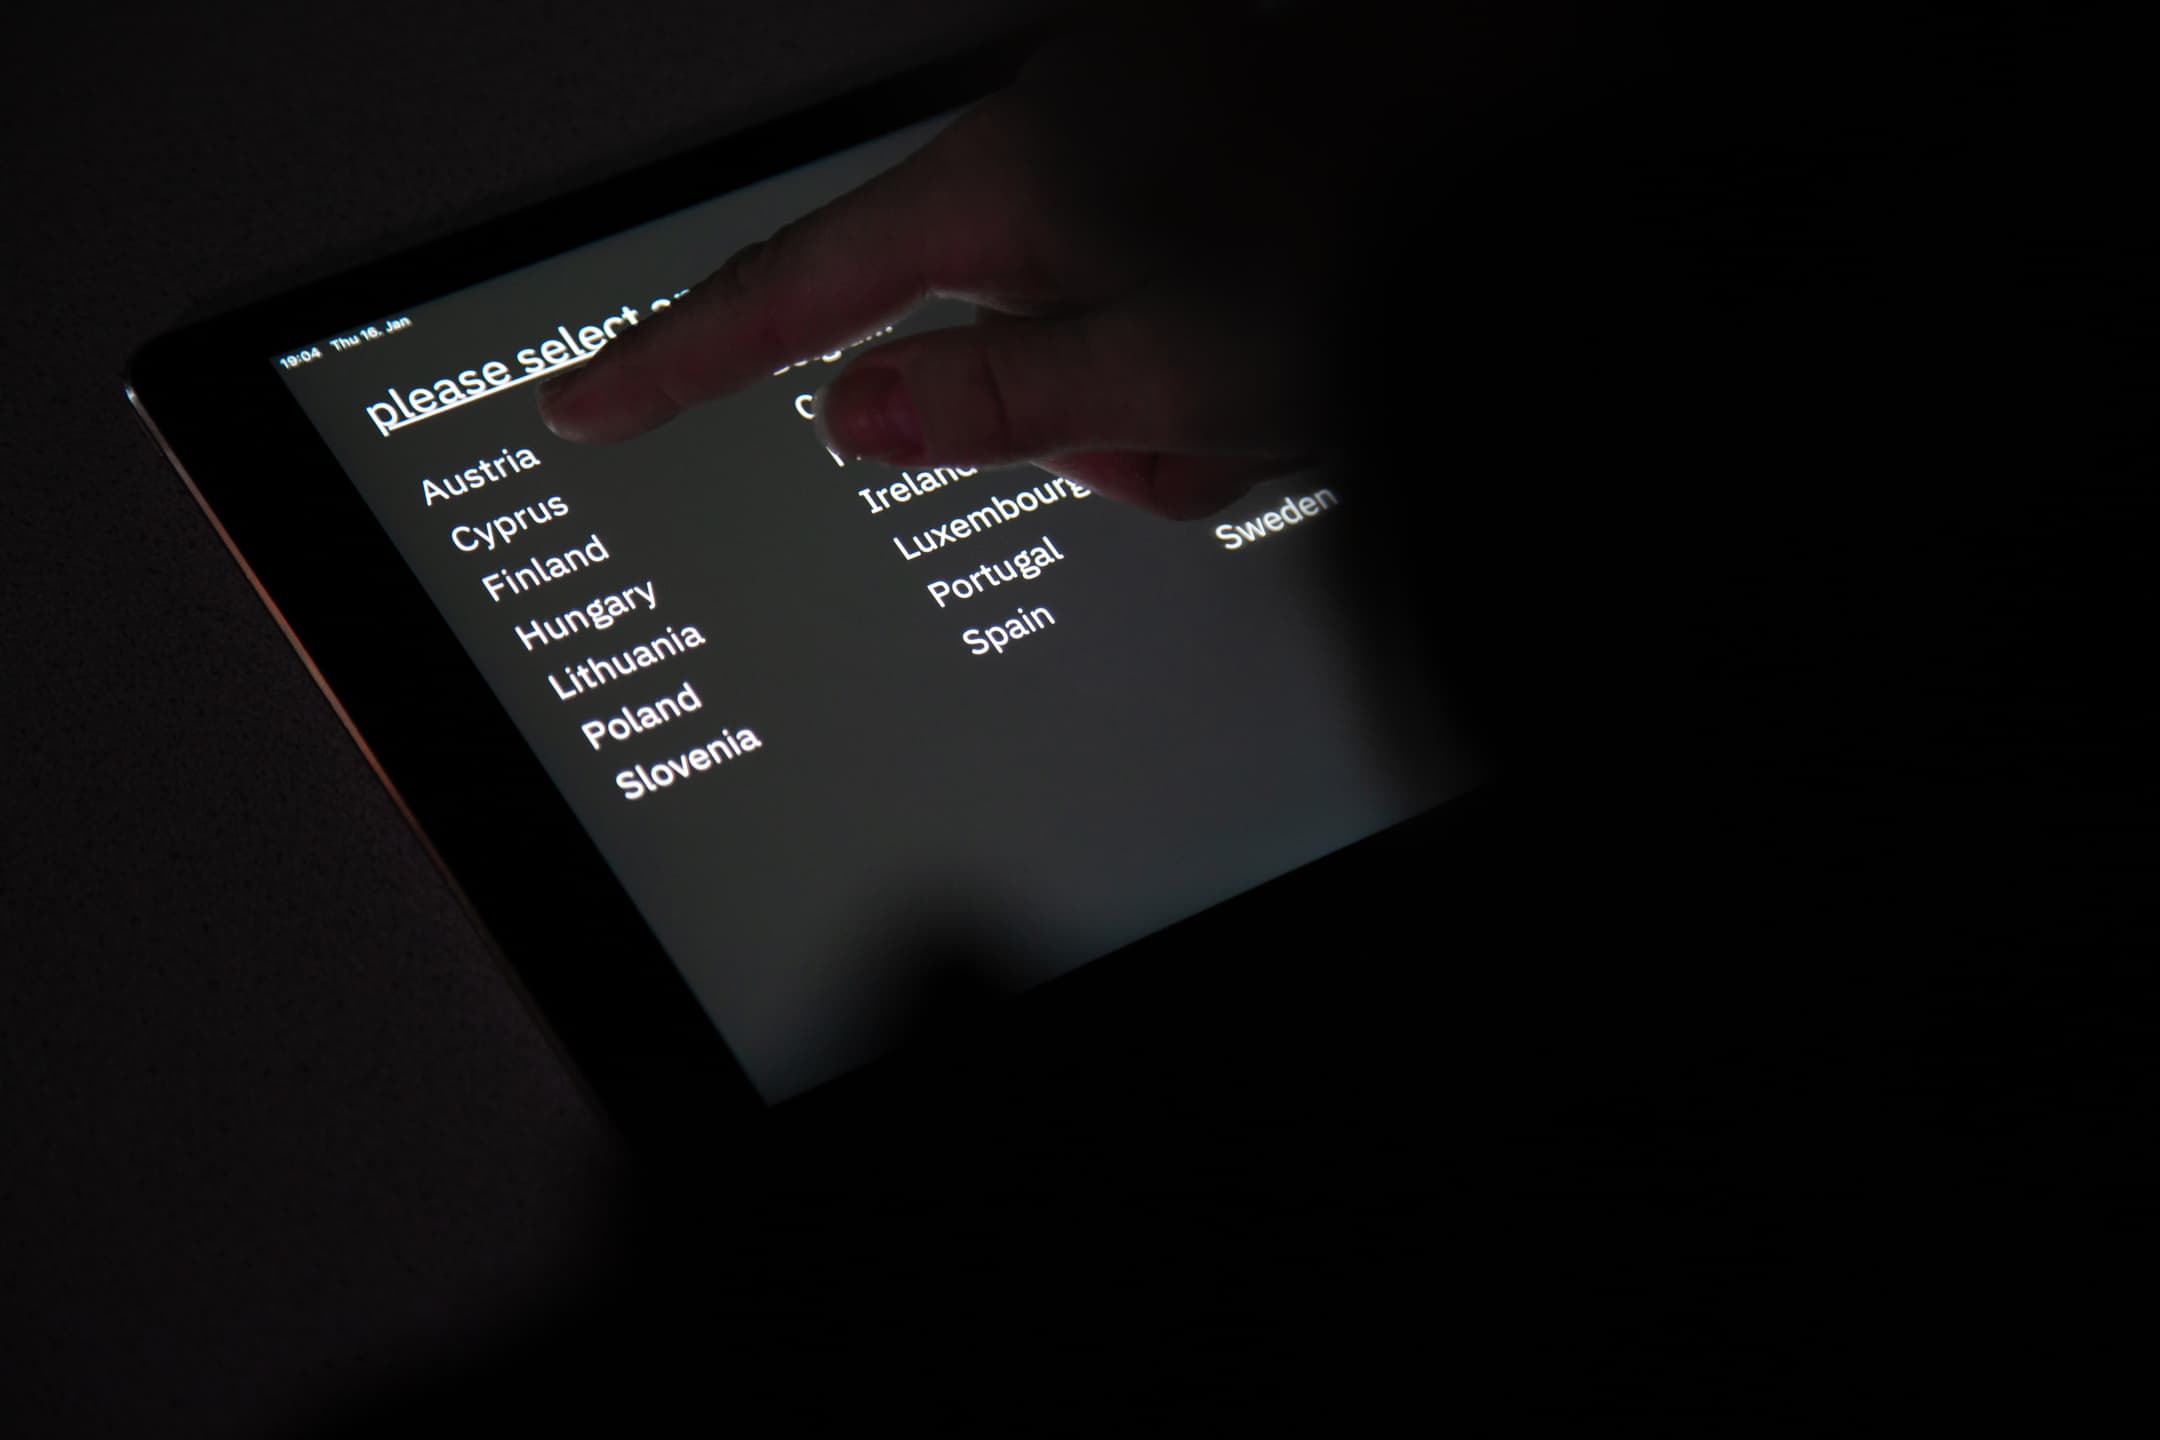 iPad screen: selecting a country from a list of EU Member States